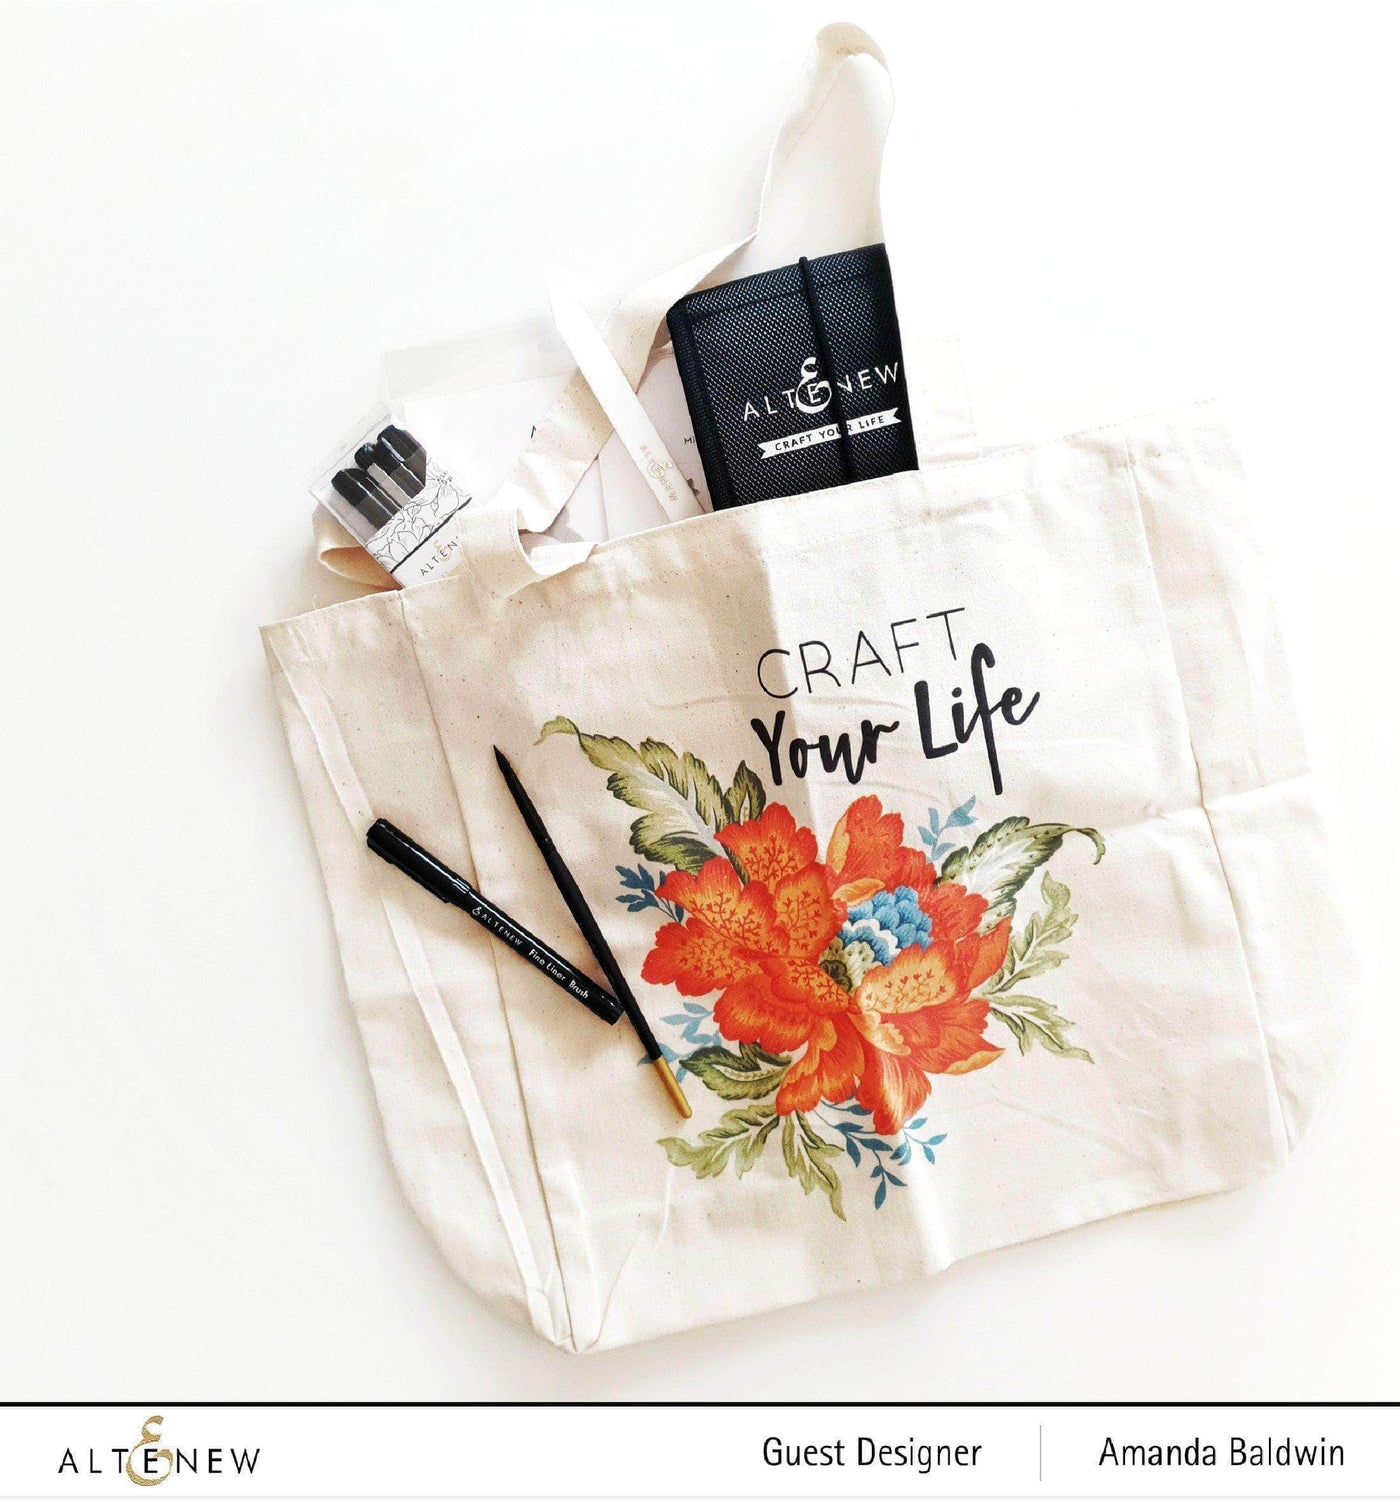 Stationery & Gifts Craft Your Life Tote Bag